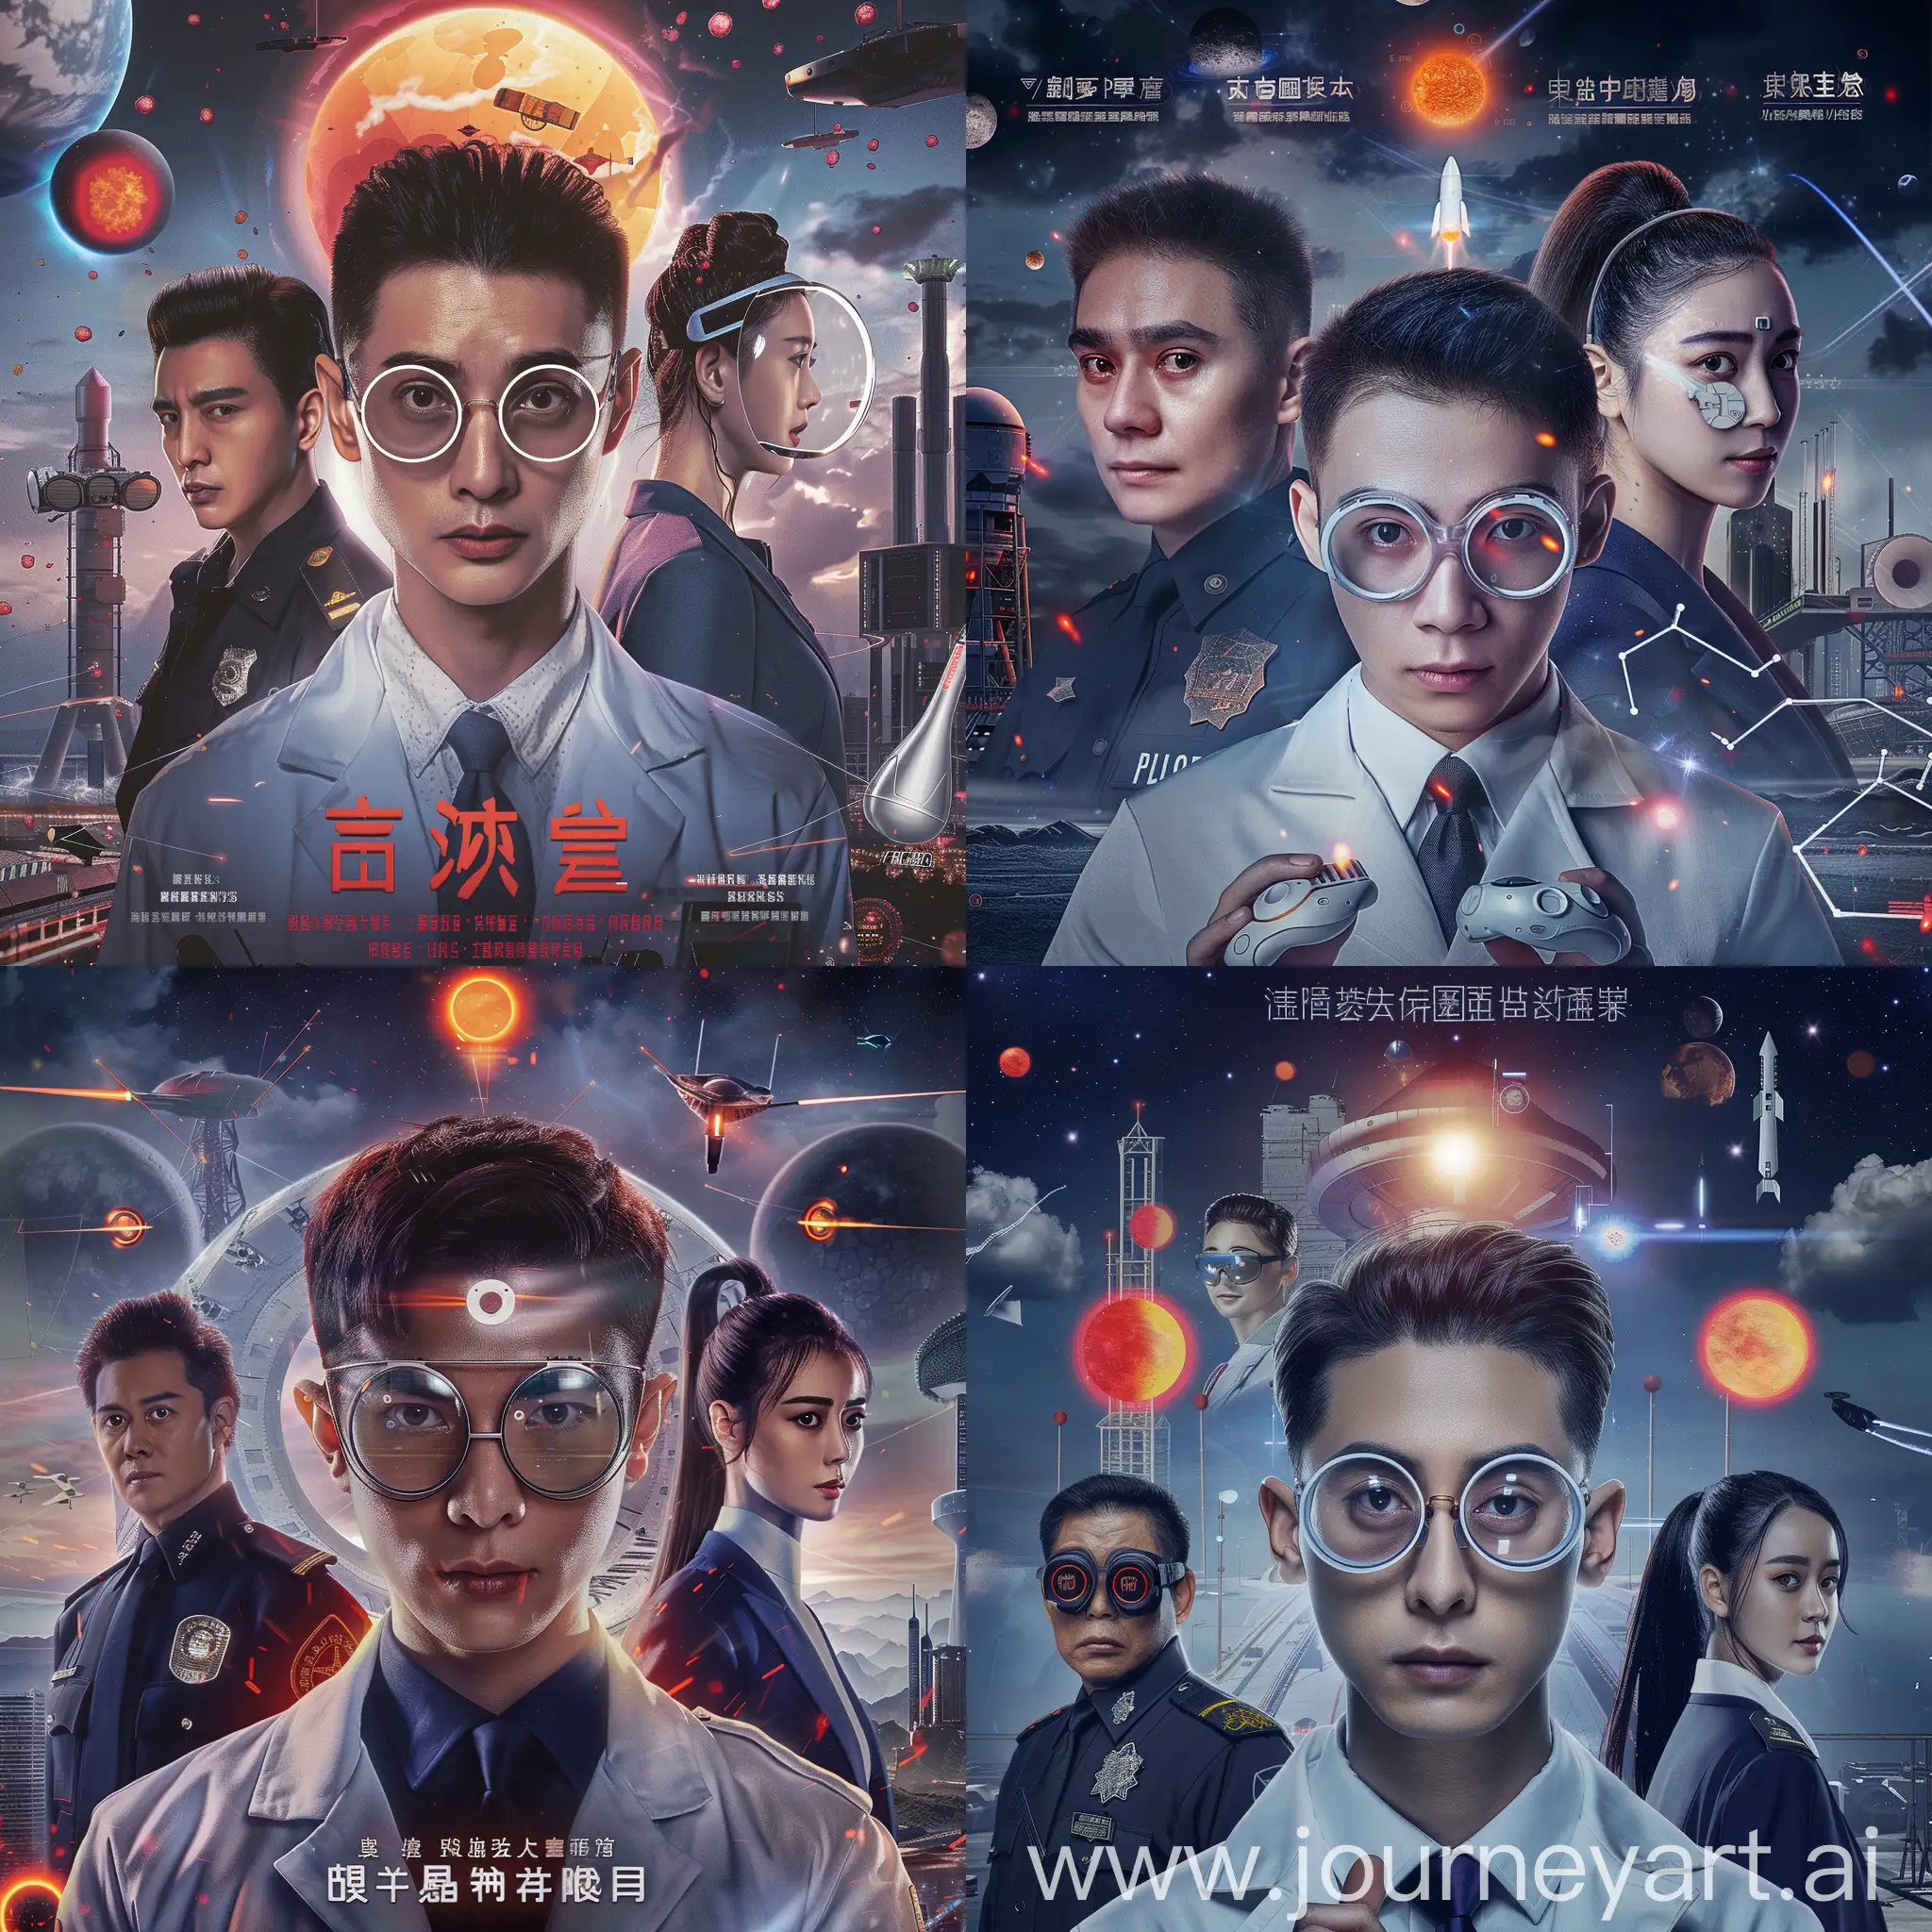 movie poster style, only three characters,

in the middle, a close-up portrait of a young serious handsome Chinese scientist, he wears round transparent glasses and white laboratory coat,

at the left of the scientist, there is one small half-length portrait of one handsome strong Chinese policeman with black Chinese police uniform,

at the right of the scientist, there is one small half-length portrait of one pretty young Chinese lady, she has a ponytail hair style and she wears a deep blue female business suit, she holds a white virtual reality headset in her hands,

in the background, there is a giant particle accelerator building and another long-rang radar station with giant antennas,

there are three red suns in the dark shining sky, a small sliver raindrop style Spaceship, many small stars are shining in the sky too, a small countdown is before the red sun in the middle,movie poster style, three characters,

in the middle, a close-up portrait of a young serious handsome Chinese scientist, he wears round transparent glasses and white laboratory coat,

at the left of the scientist, there is one small half-length portrait of one handsome strong Chinese policeman with black Chinese police uniform,

at the right of the scientist, there is one small half-length portrait of one pretty young Chinese lady, she has a ponytail hair style and she wears a deep blue female business suit, she holds a white virtual reality headset in her hands,

in the background, there is a giant particle accelerator building,

there are three red suns in the dark shining sky, a small sliver raindrop style Spaceship, many small stars are shining in the sky too, a small countdown is before the red sun in the middle,